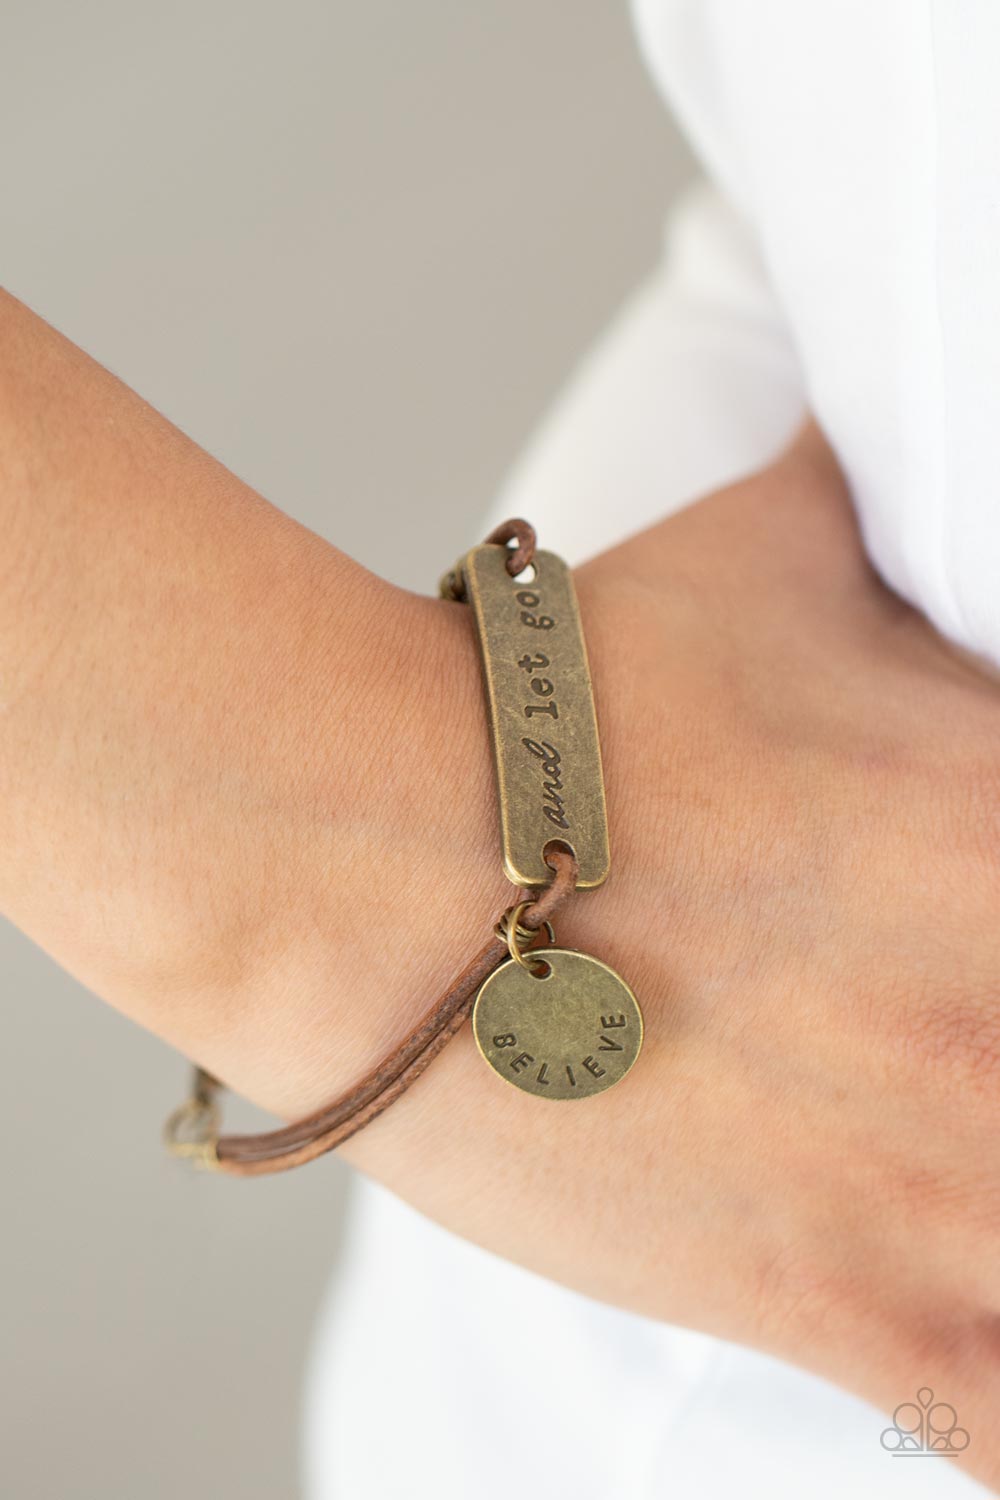 Believe and Let Go - Brass Urban Motivational Bracelets an antiqued disc stamped in the word, "believe" and a brass plate stamped in the phrase, "and let go," are knotted in place around the wrist with layers of brown suede cording, creating a motivational centerpiece. Features an adjustable clasp closure.